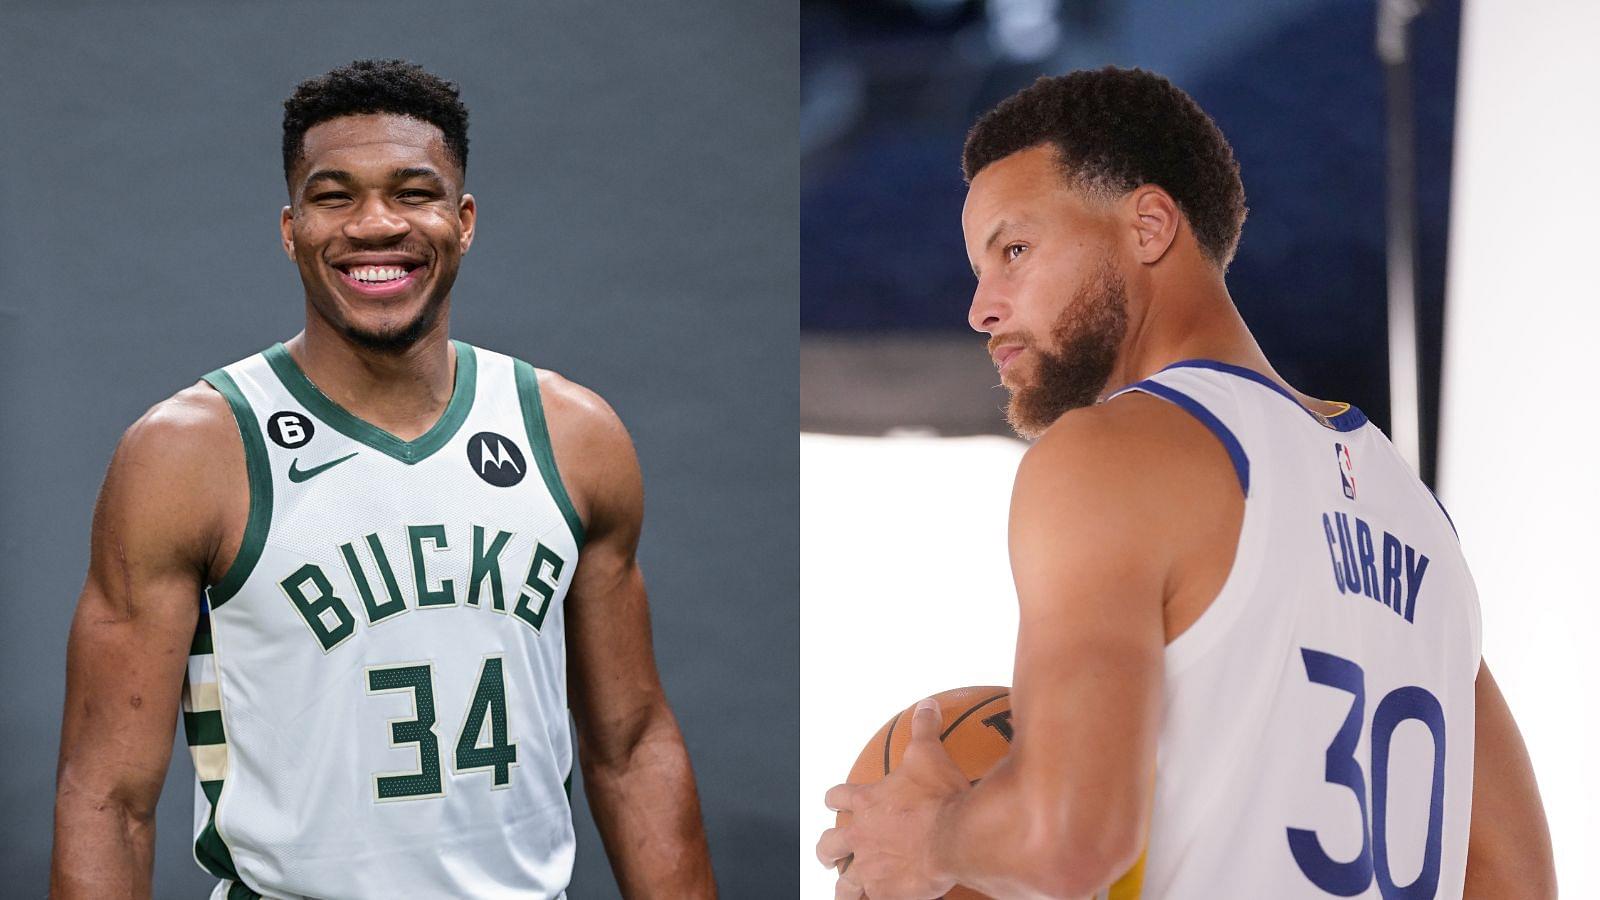 Stephen Curry is “not going to soften up” by Giannis Antetokounmpo's #1 praise